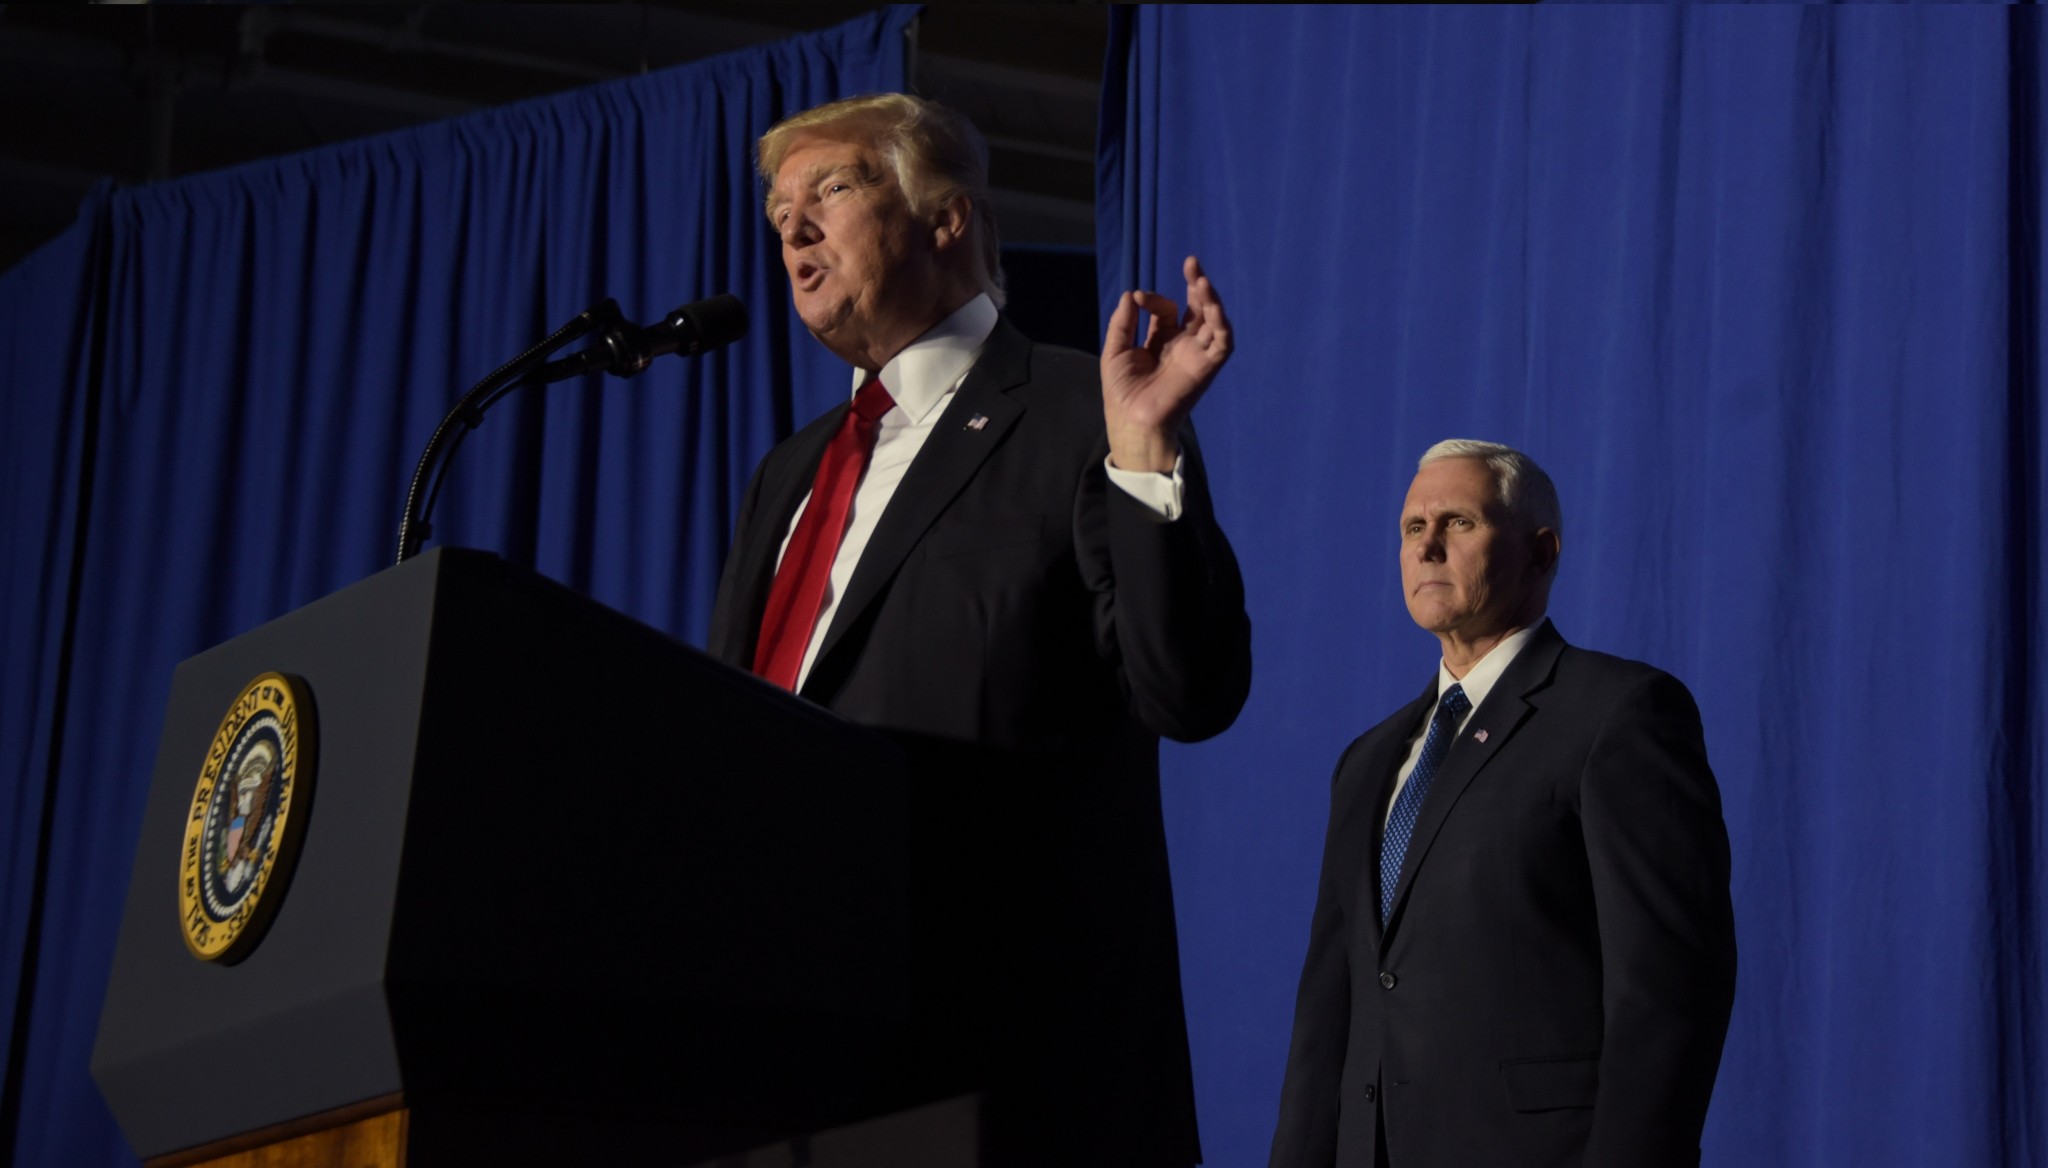 U.S. President Donald Trump and Vice President Mike Pence, January 28, 2017 (Image: US DHS)